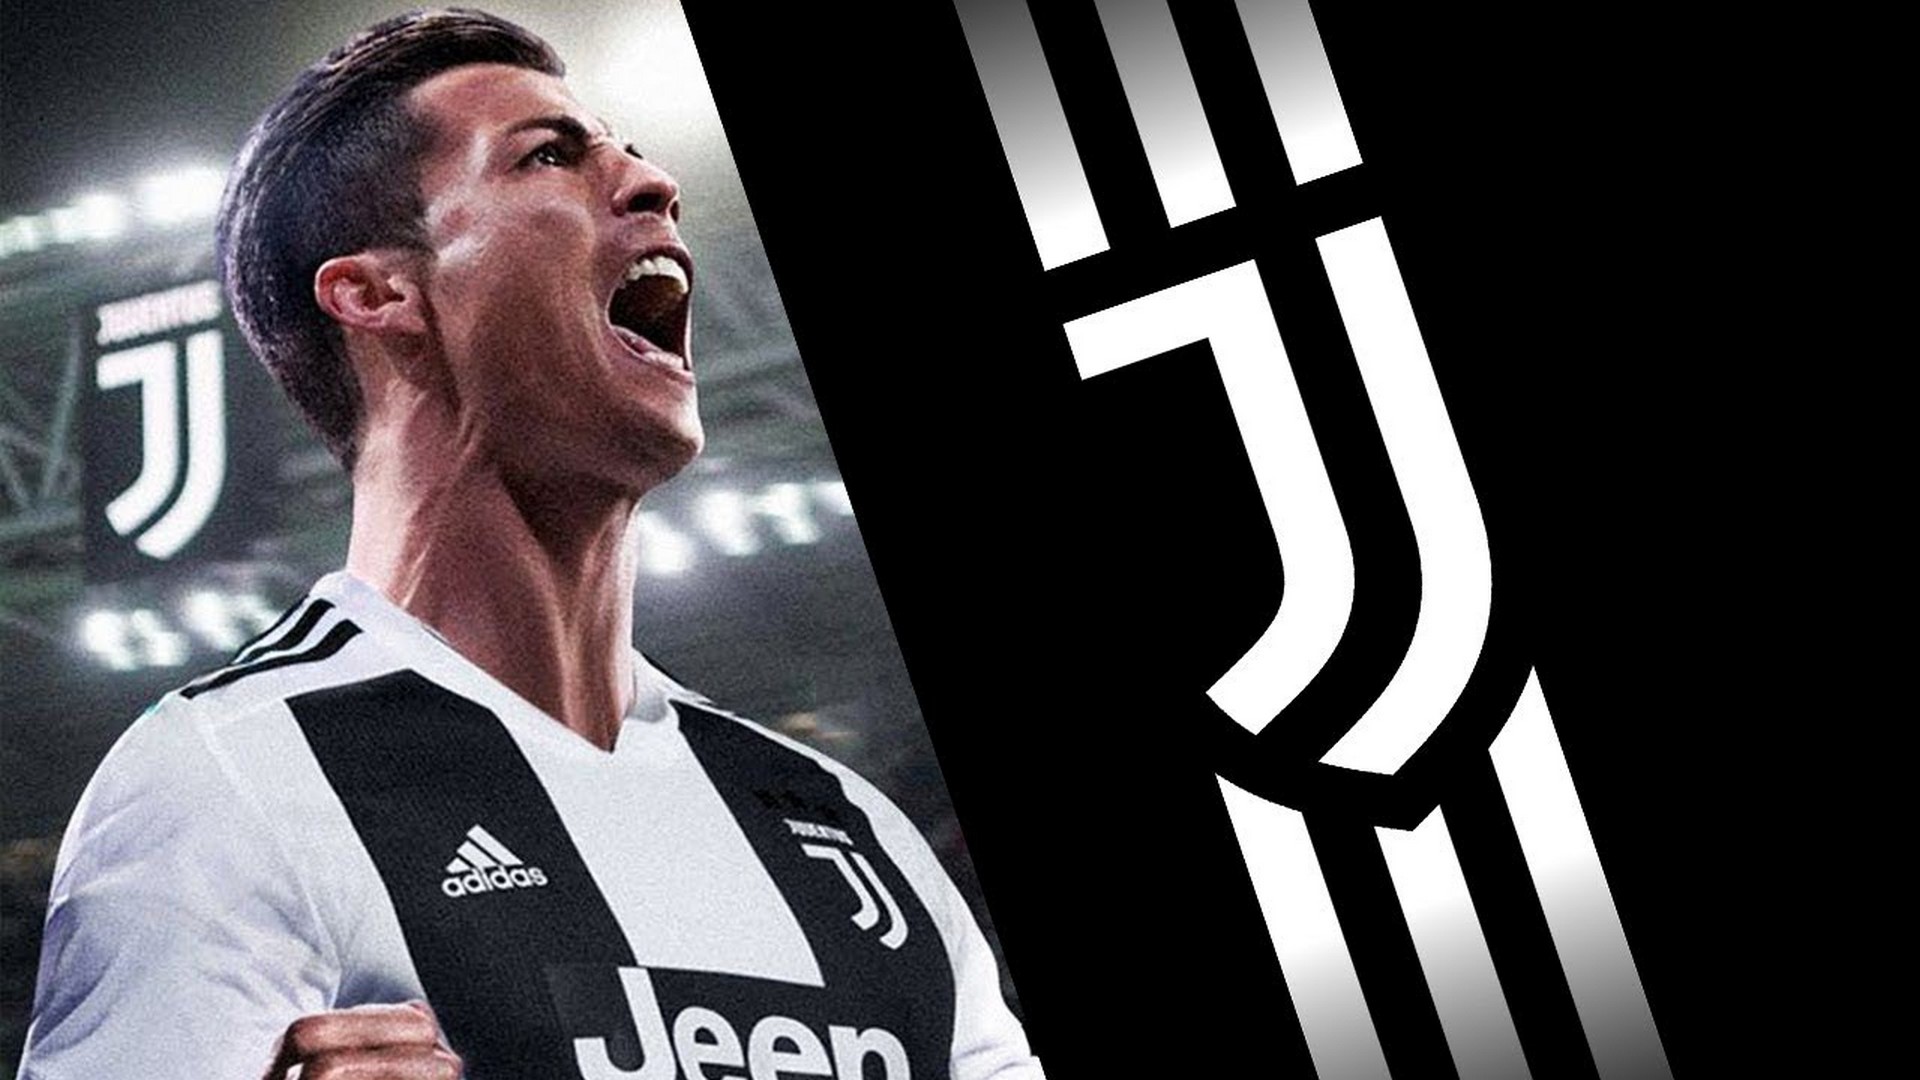 C Ronaldo Juventus Wallpaper with resolution 1920X1080 pixel. You can use this wallpaper as background for your desktop Computer Screensavers, Android or iPhone smartphones